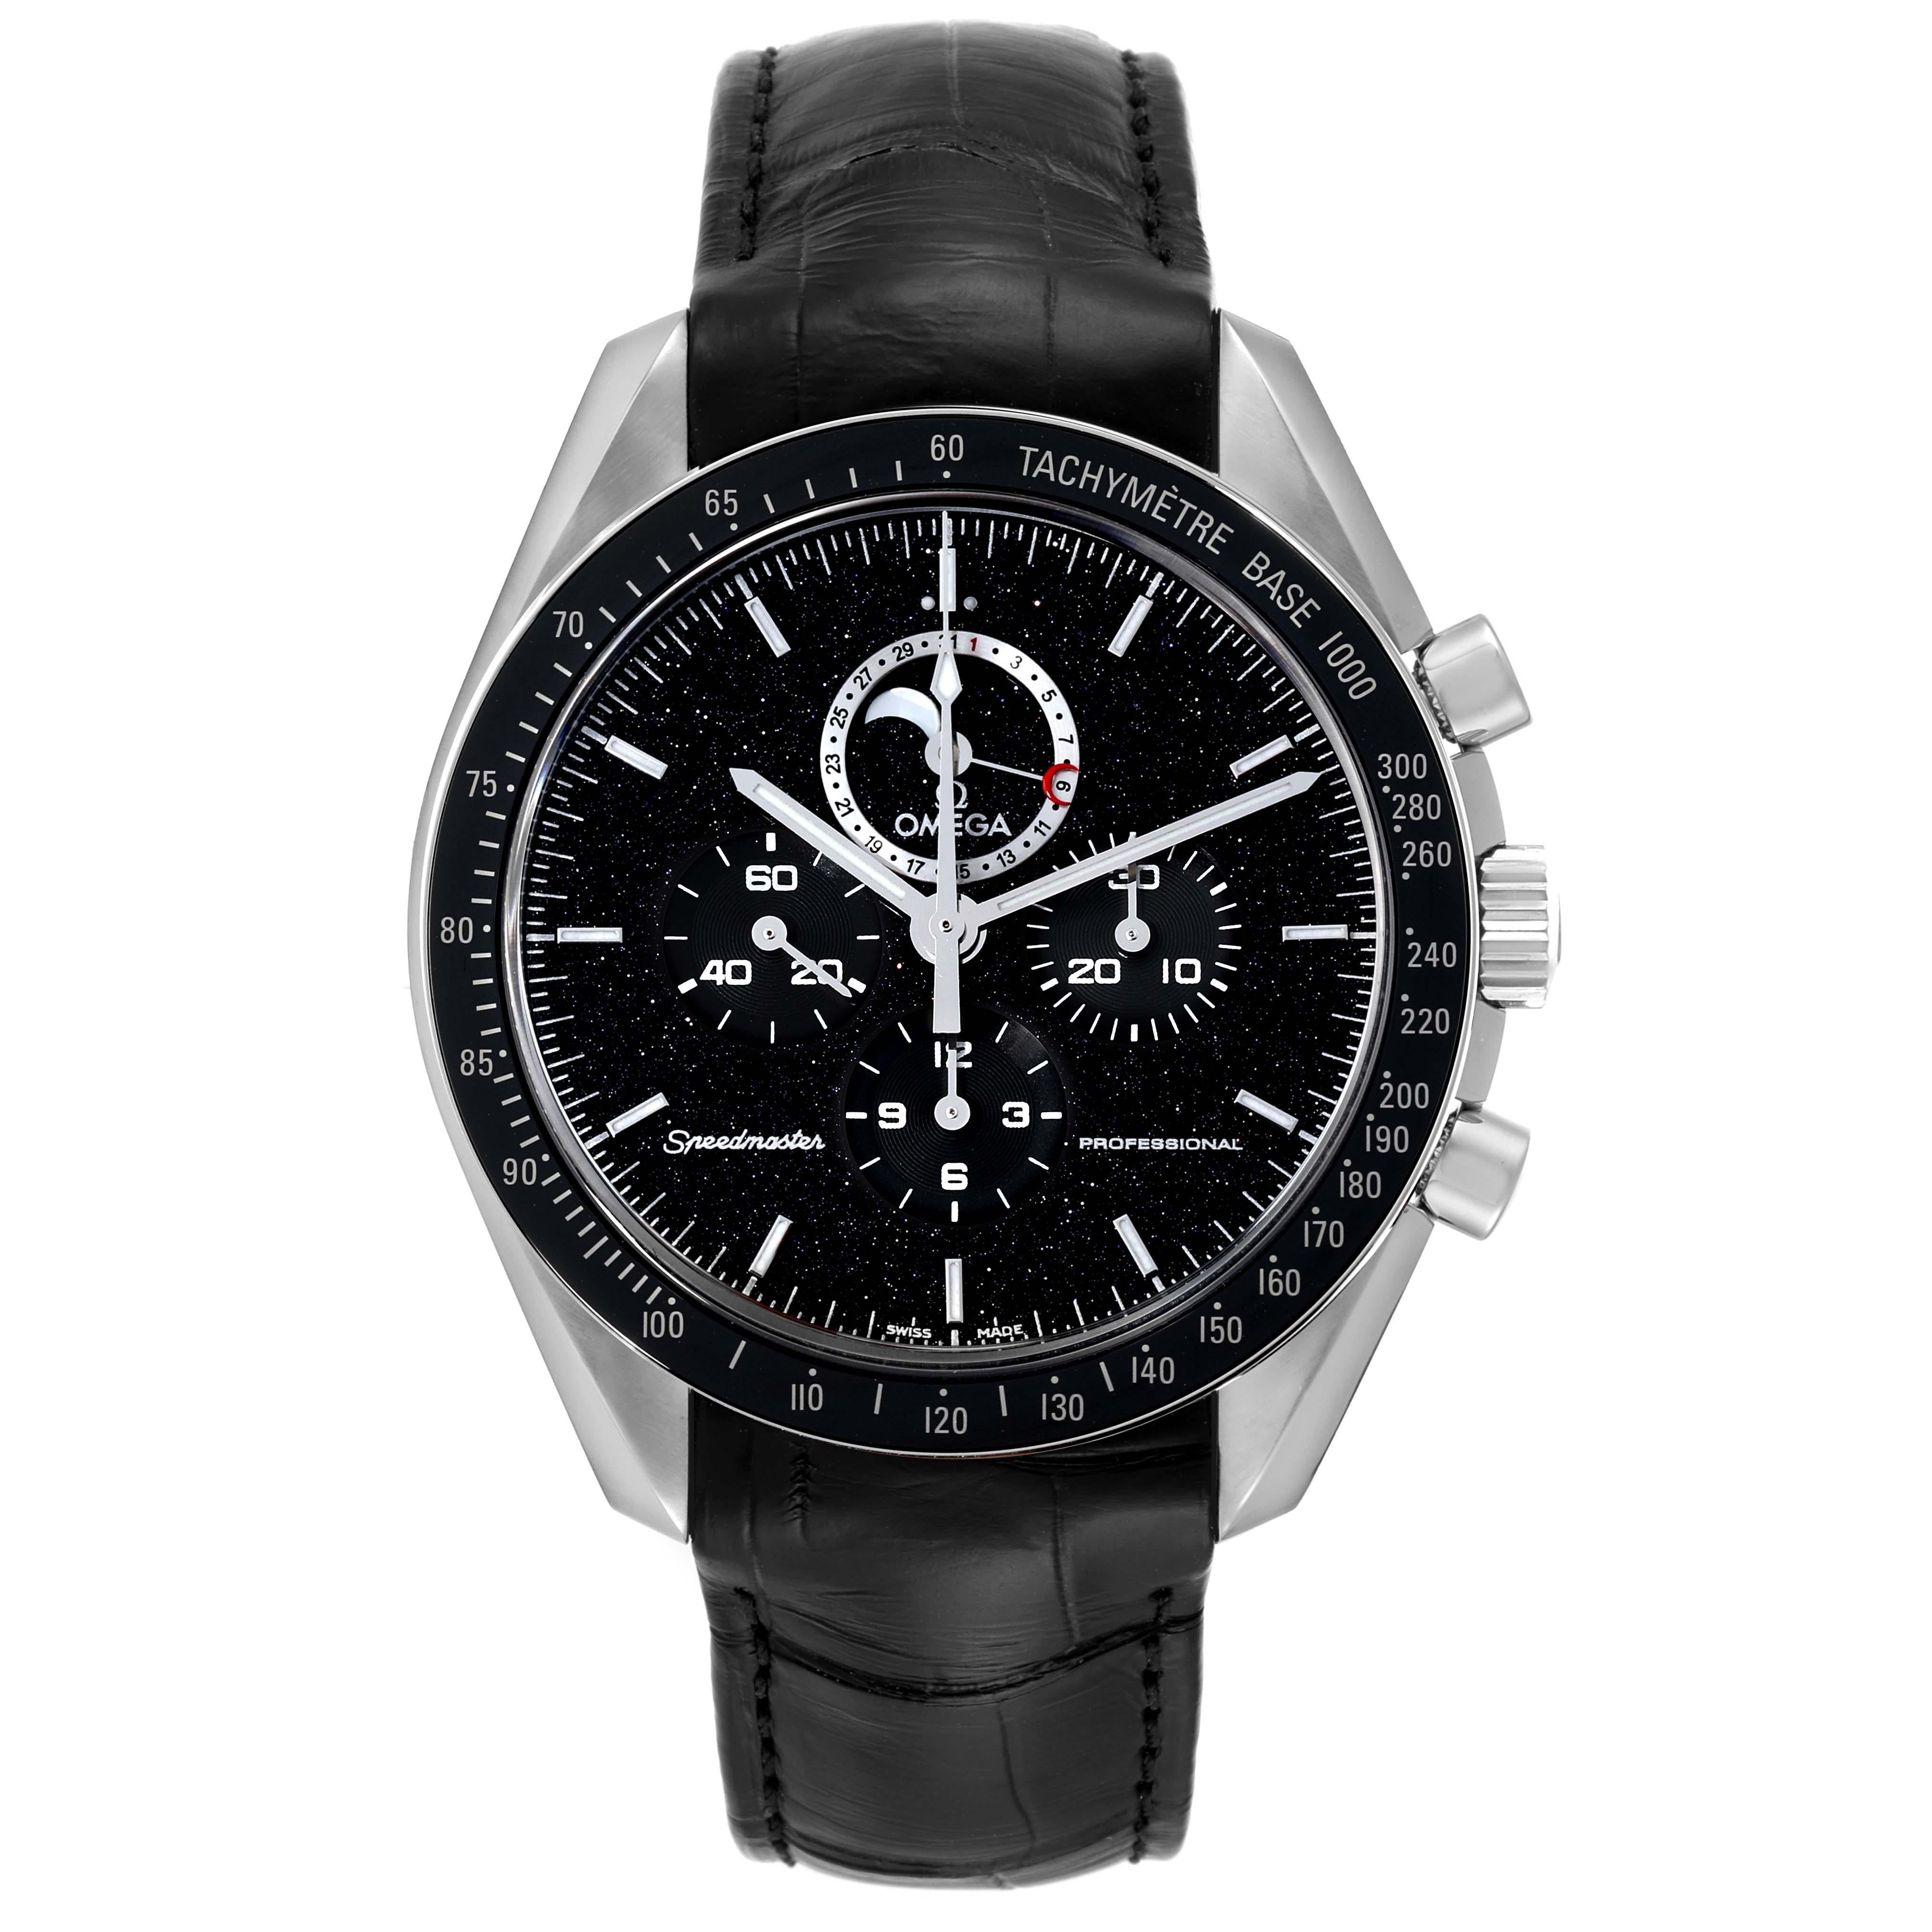 Omega Speedmaster Moonphase Steel Mens Watch 311.33.44.32.01.001 Box Card. Manual winding chronograph movement. Stainless steel round case 44.25mm in diameter. Transparent exhibition sapphire caseback. Stainless steel bezel with black ceramic